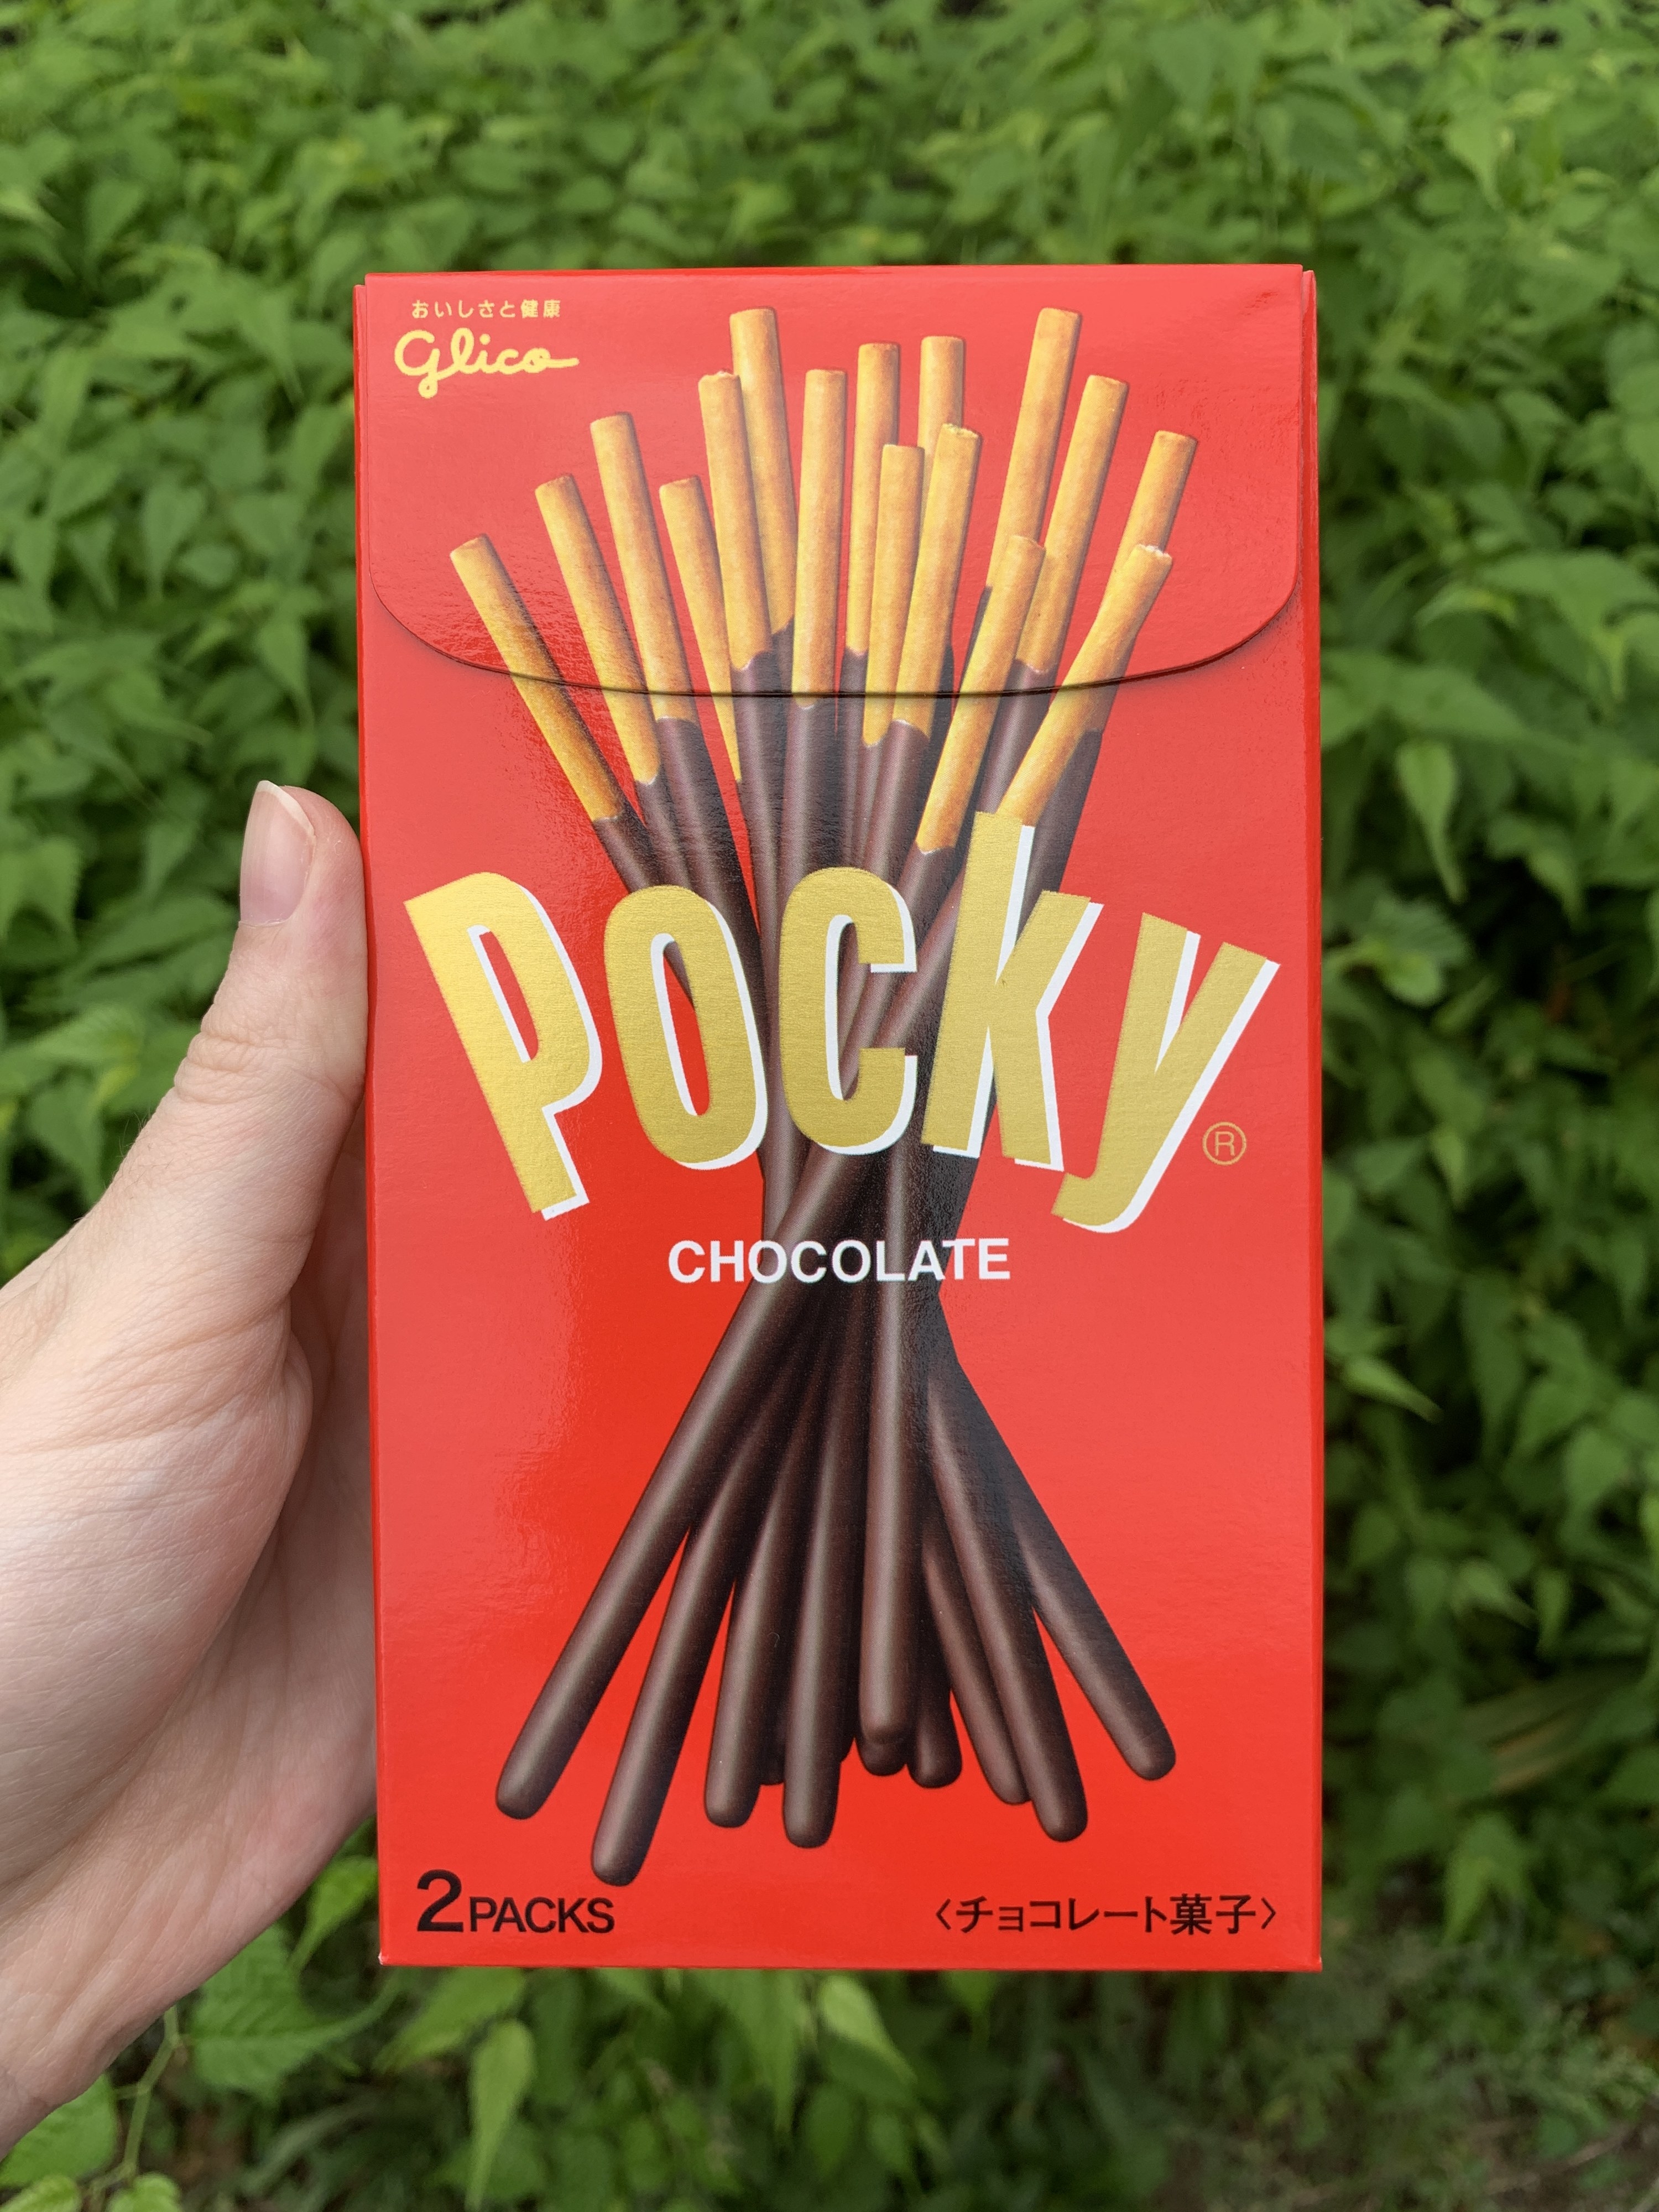 A hand holding a box of Pocky